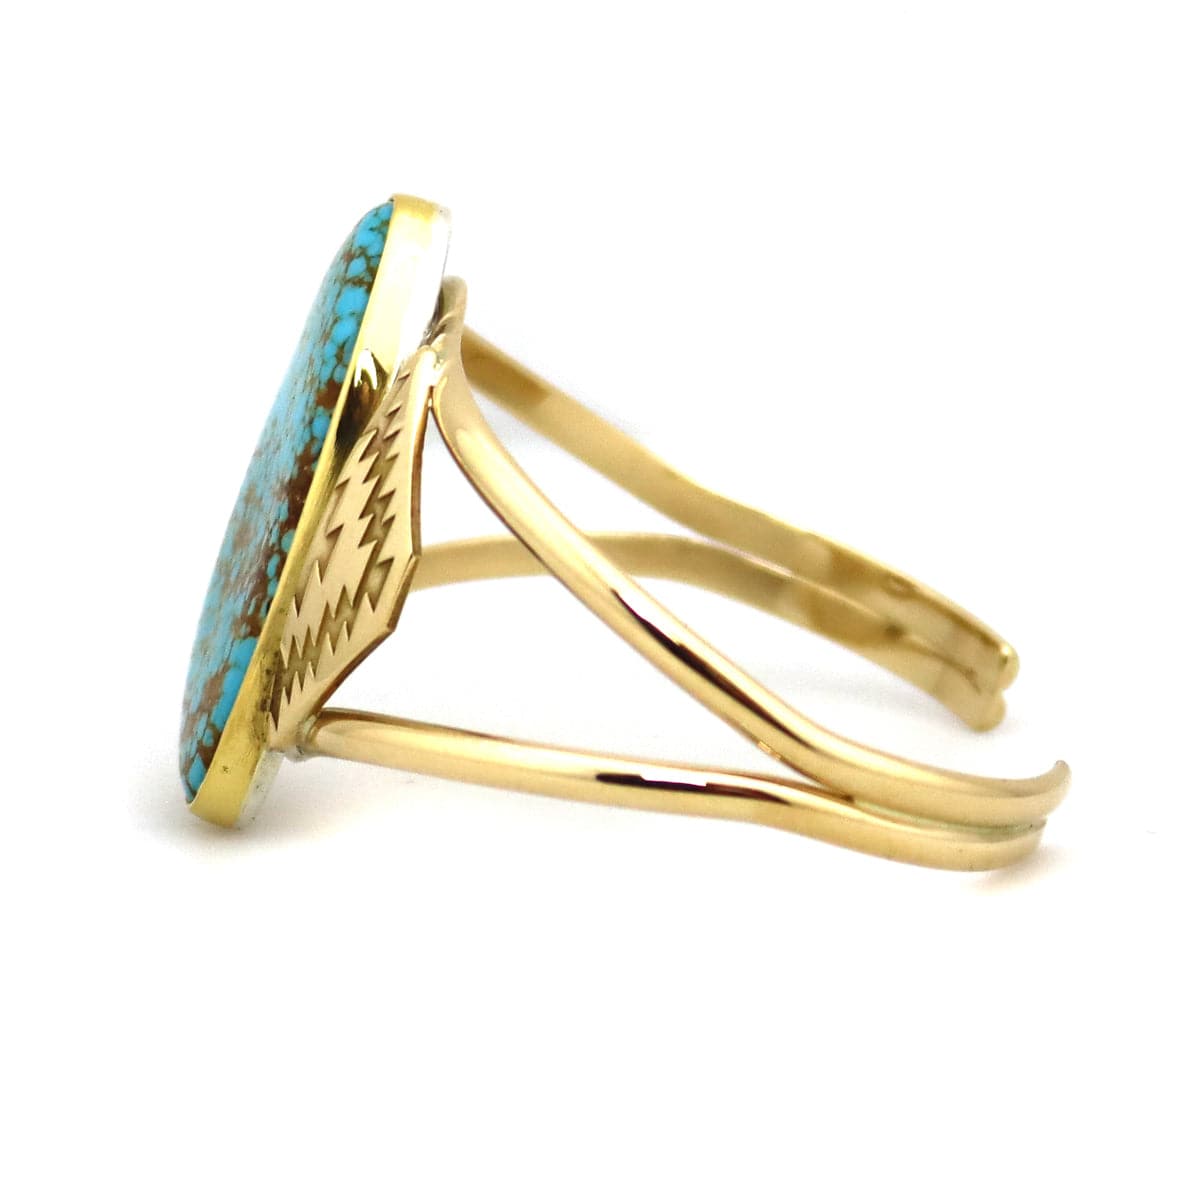 Mark Sublette Collection - Featuring Sam Patania #8 Turquoise and 18K Gold Bracelet, size 6.75 (J13333)2